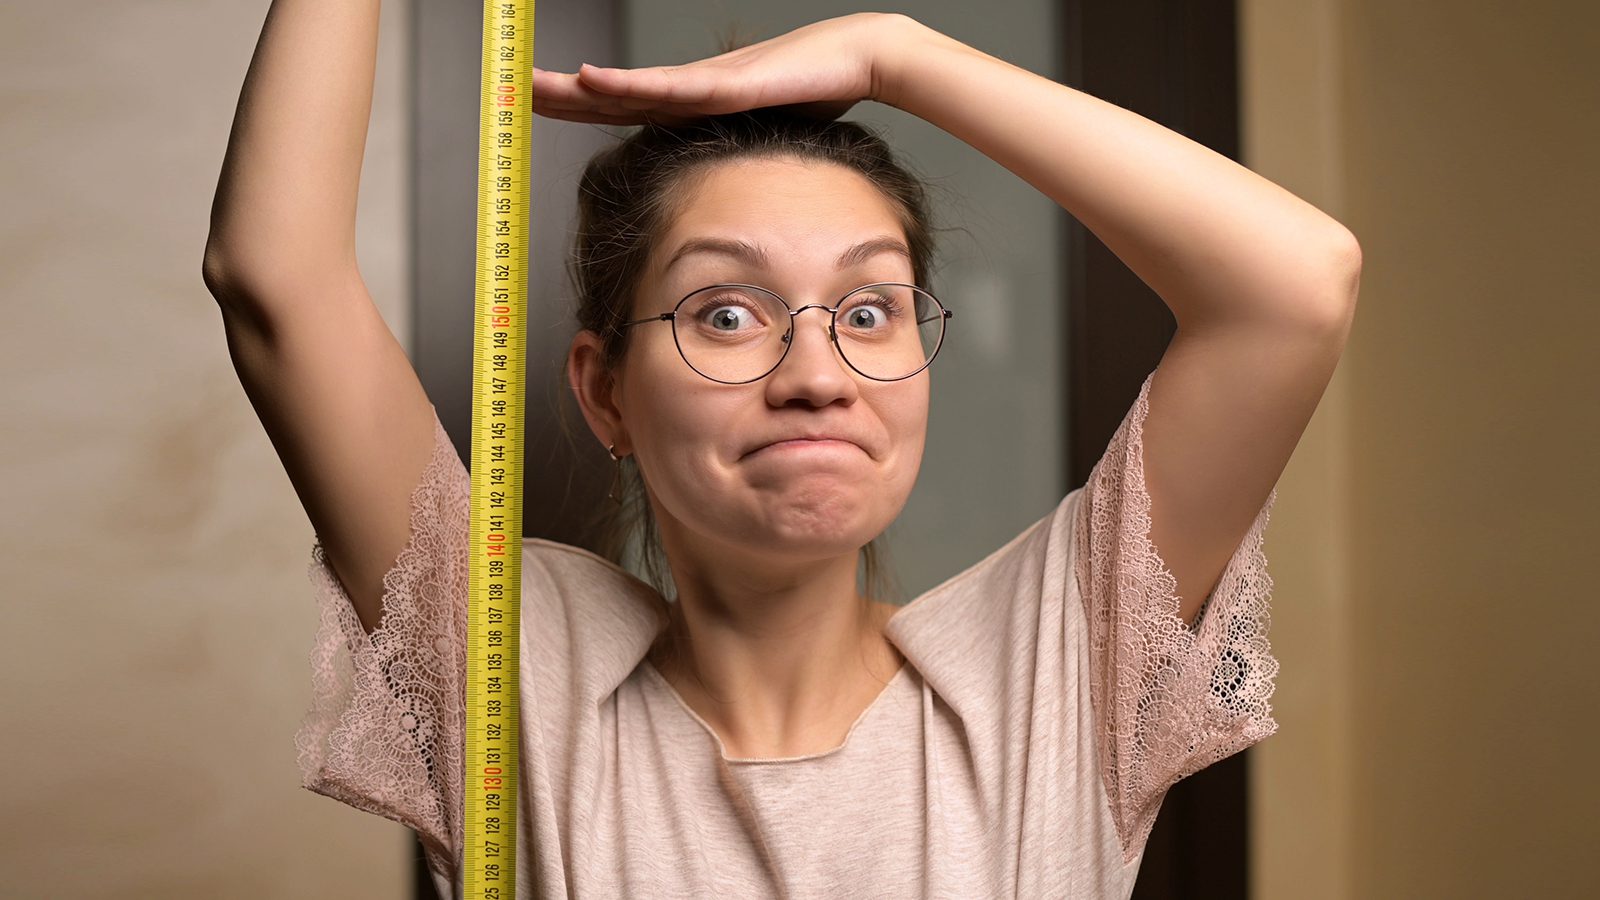 Science Reveals That Short People May Live Longer